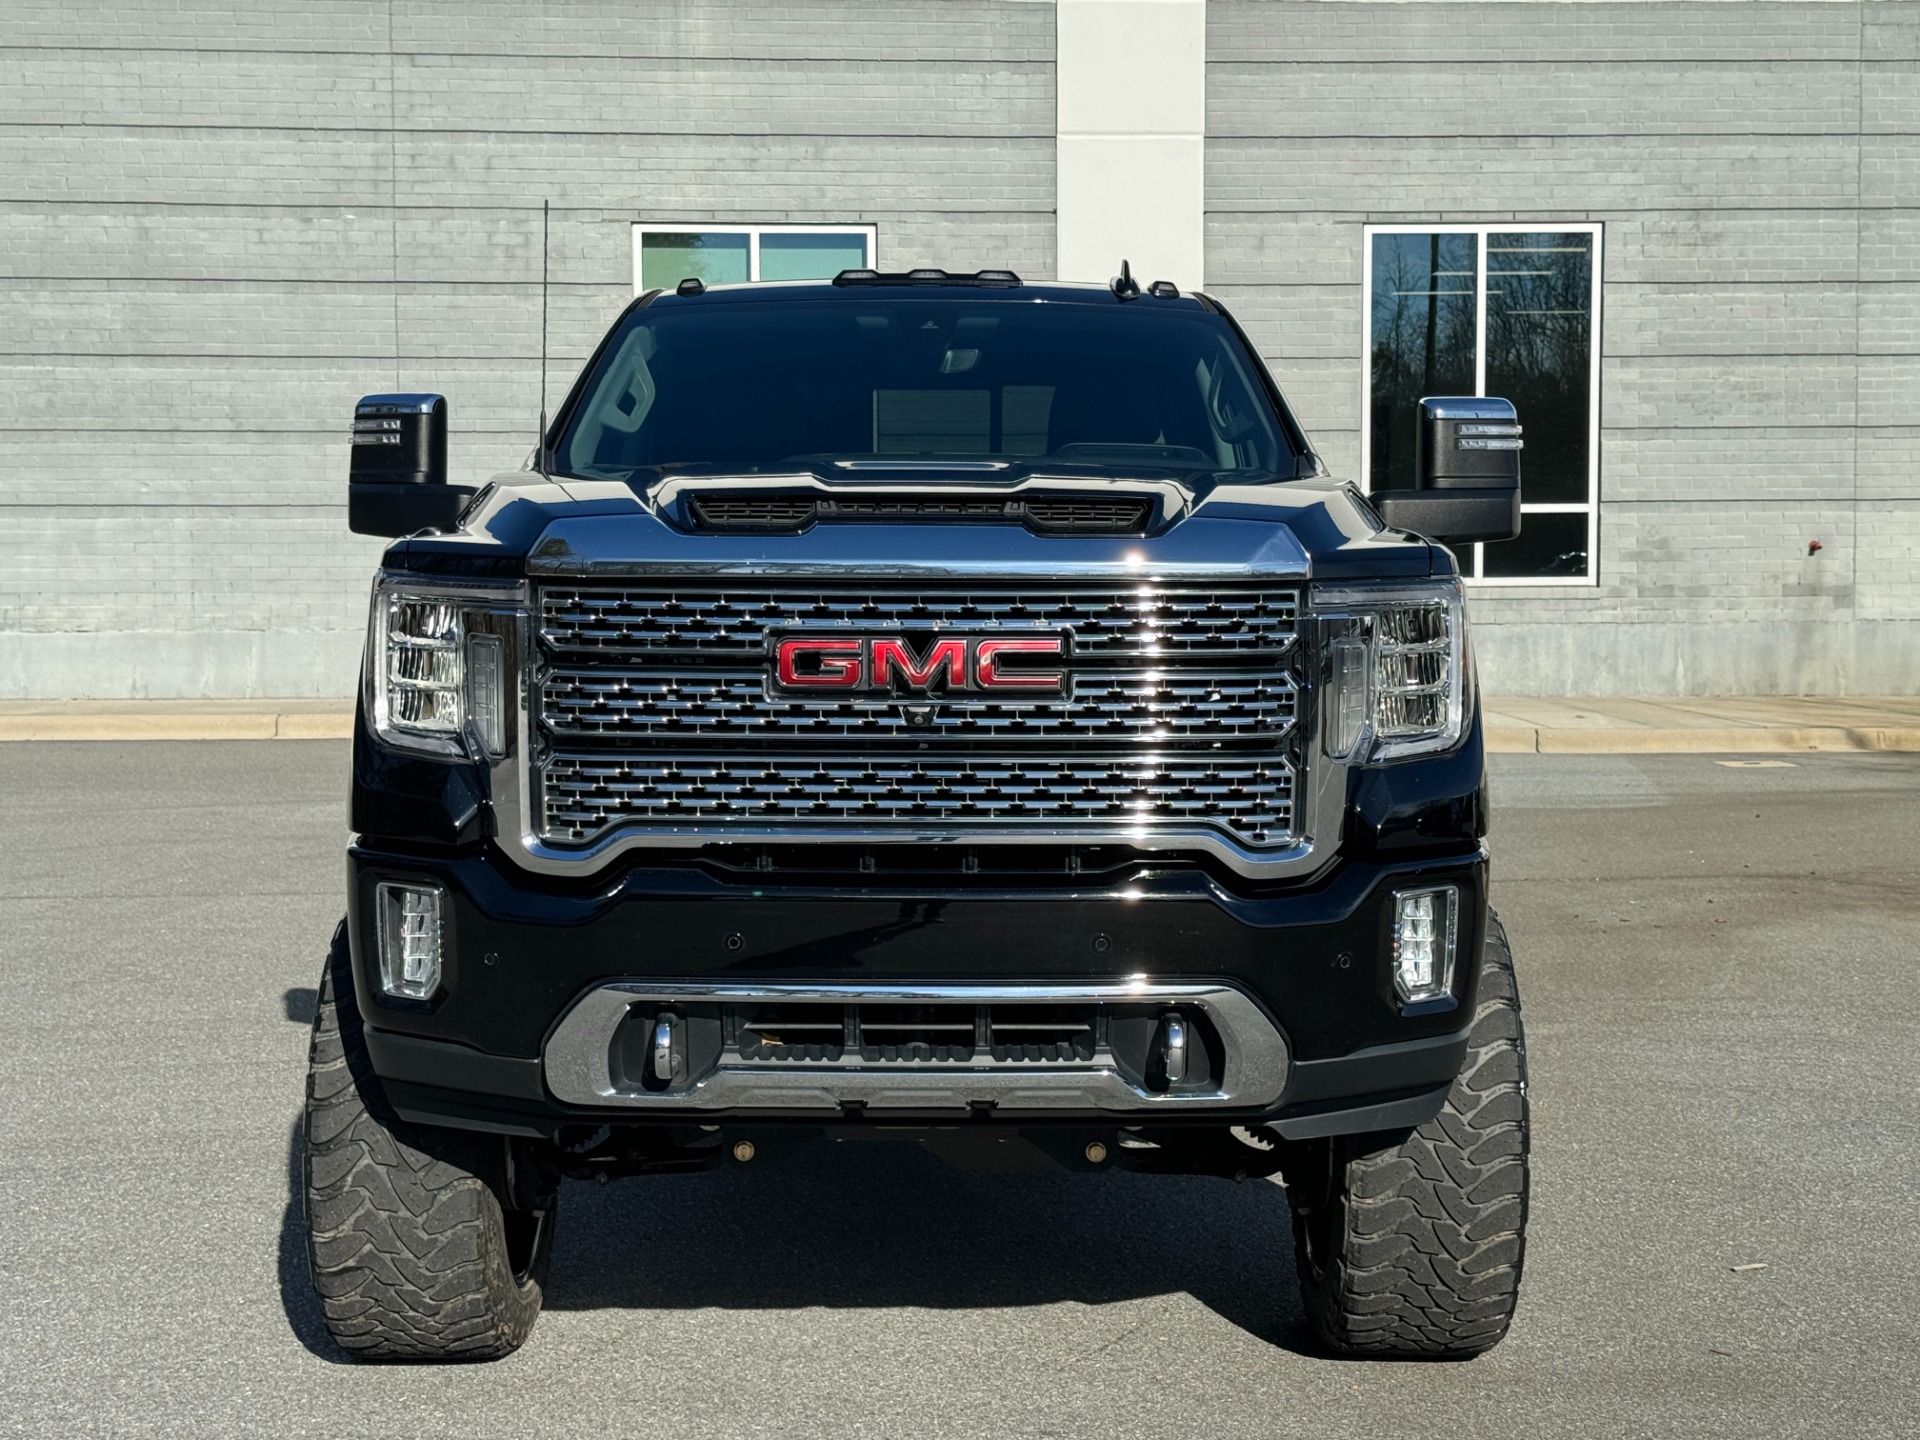 Used 2020 GMC Sierra 2500HD Denali Crew Cab LIFTED / HARDROCK WHEELS for sale $72,995 at Formula Imports in Charlotte NC 28227 2